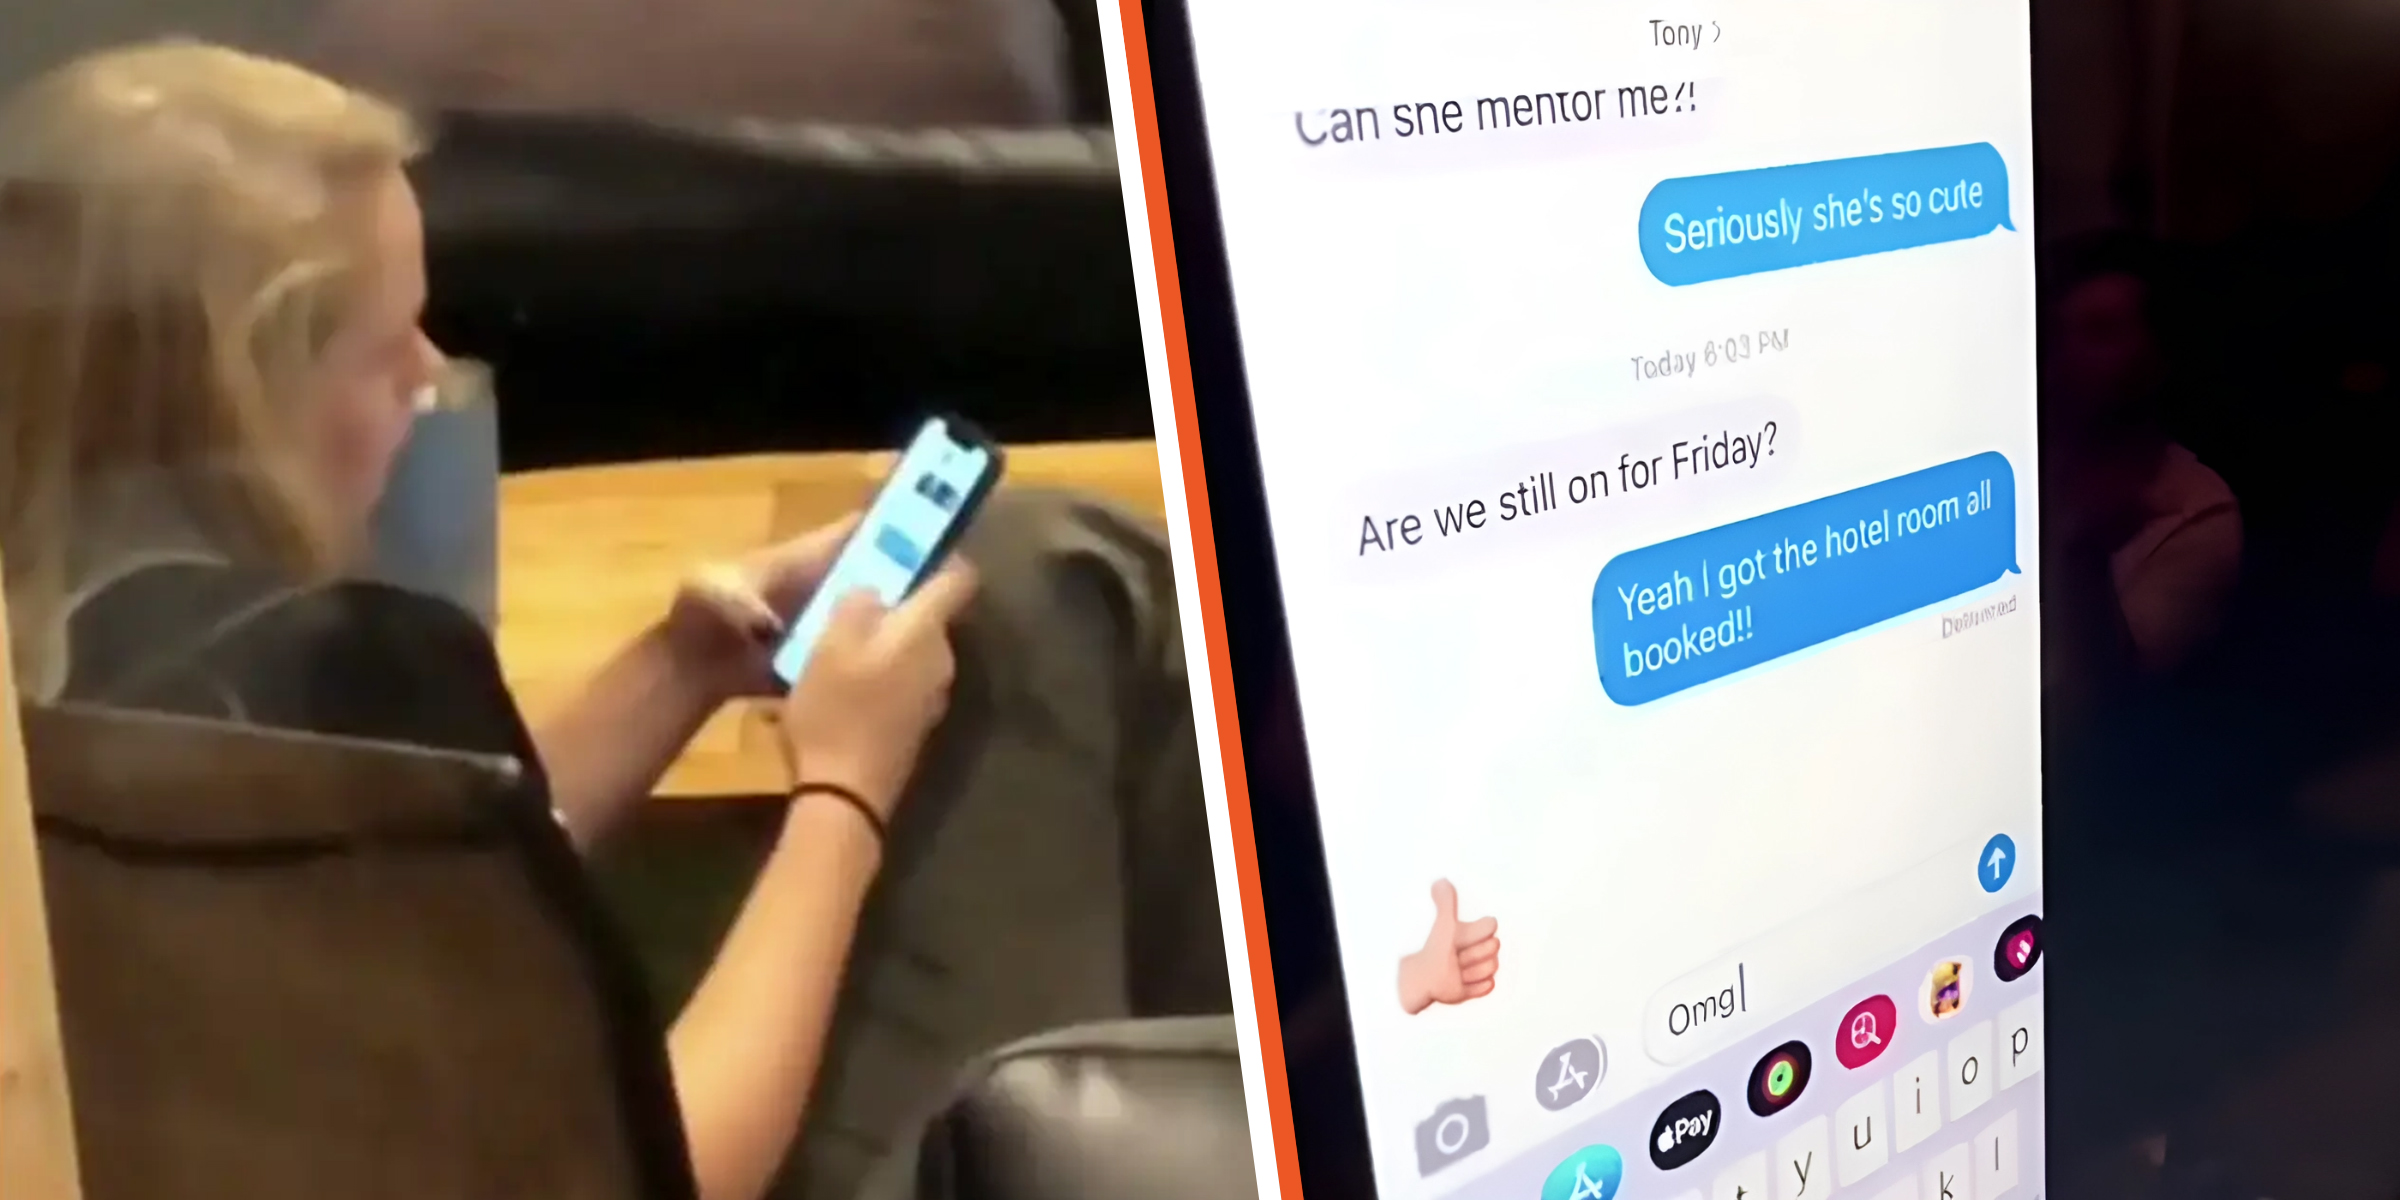 Tempers flair as a woman finds out her friend is texting her boyfriend | Source: TikTok/loviewa